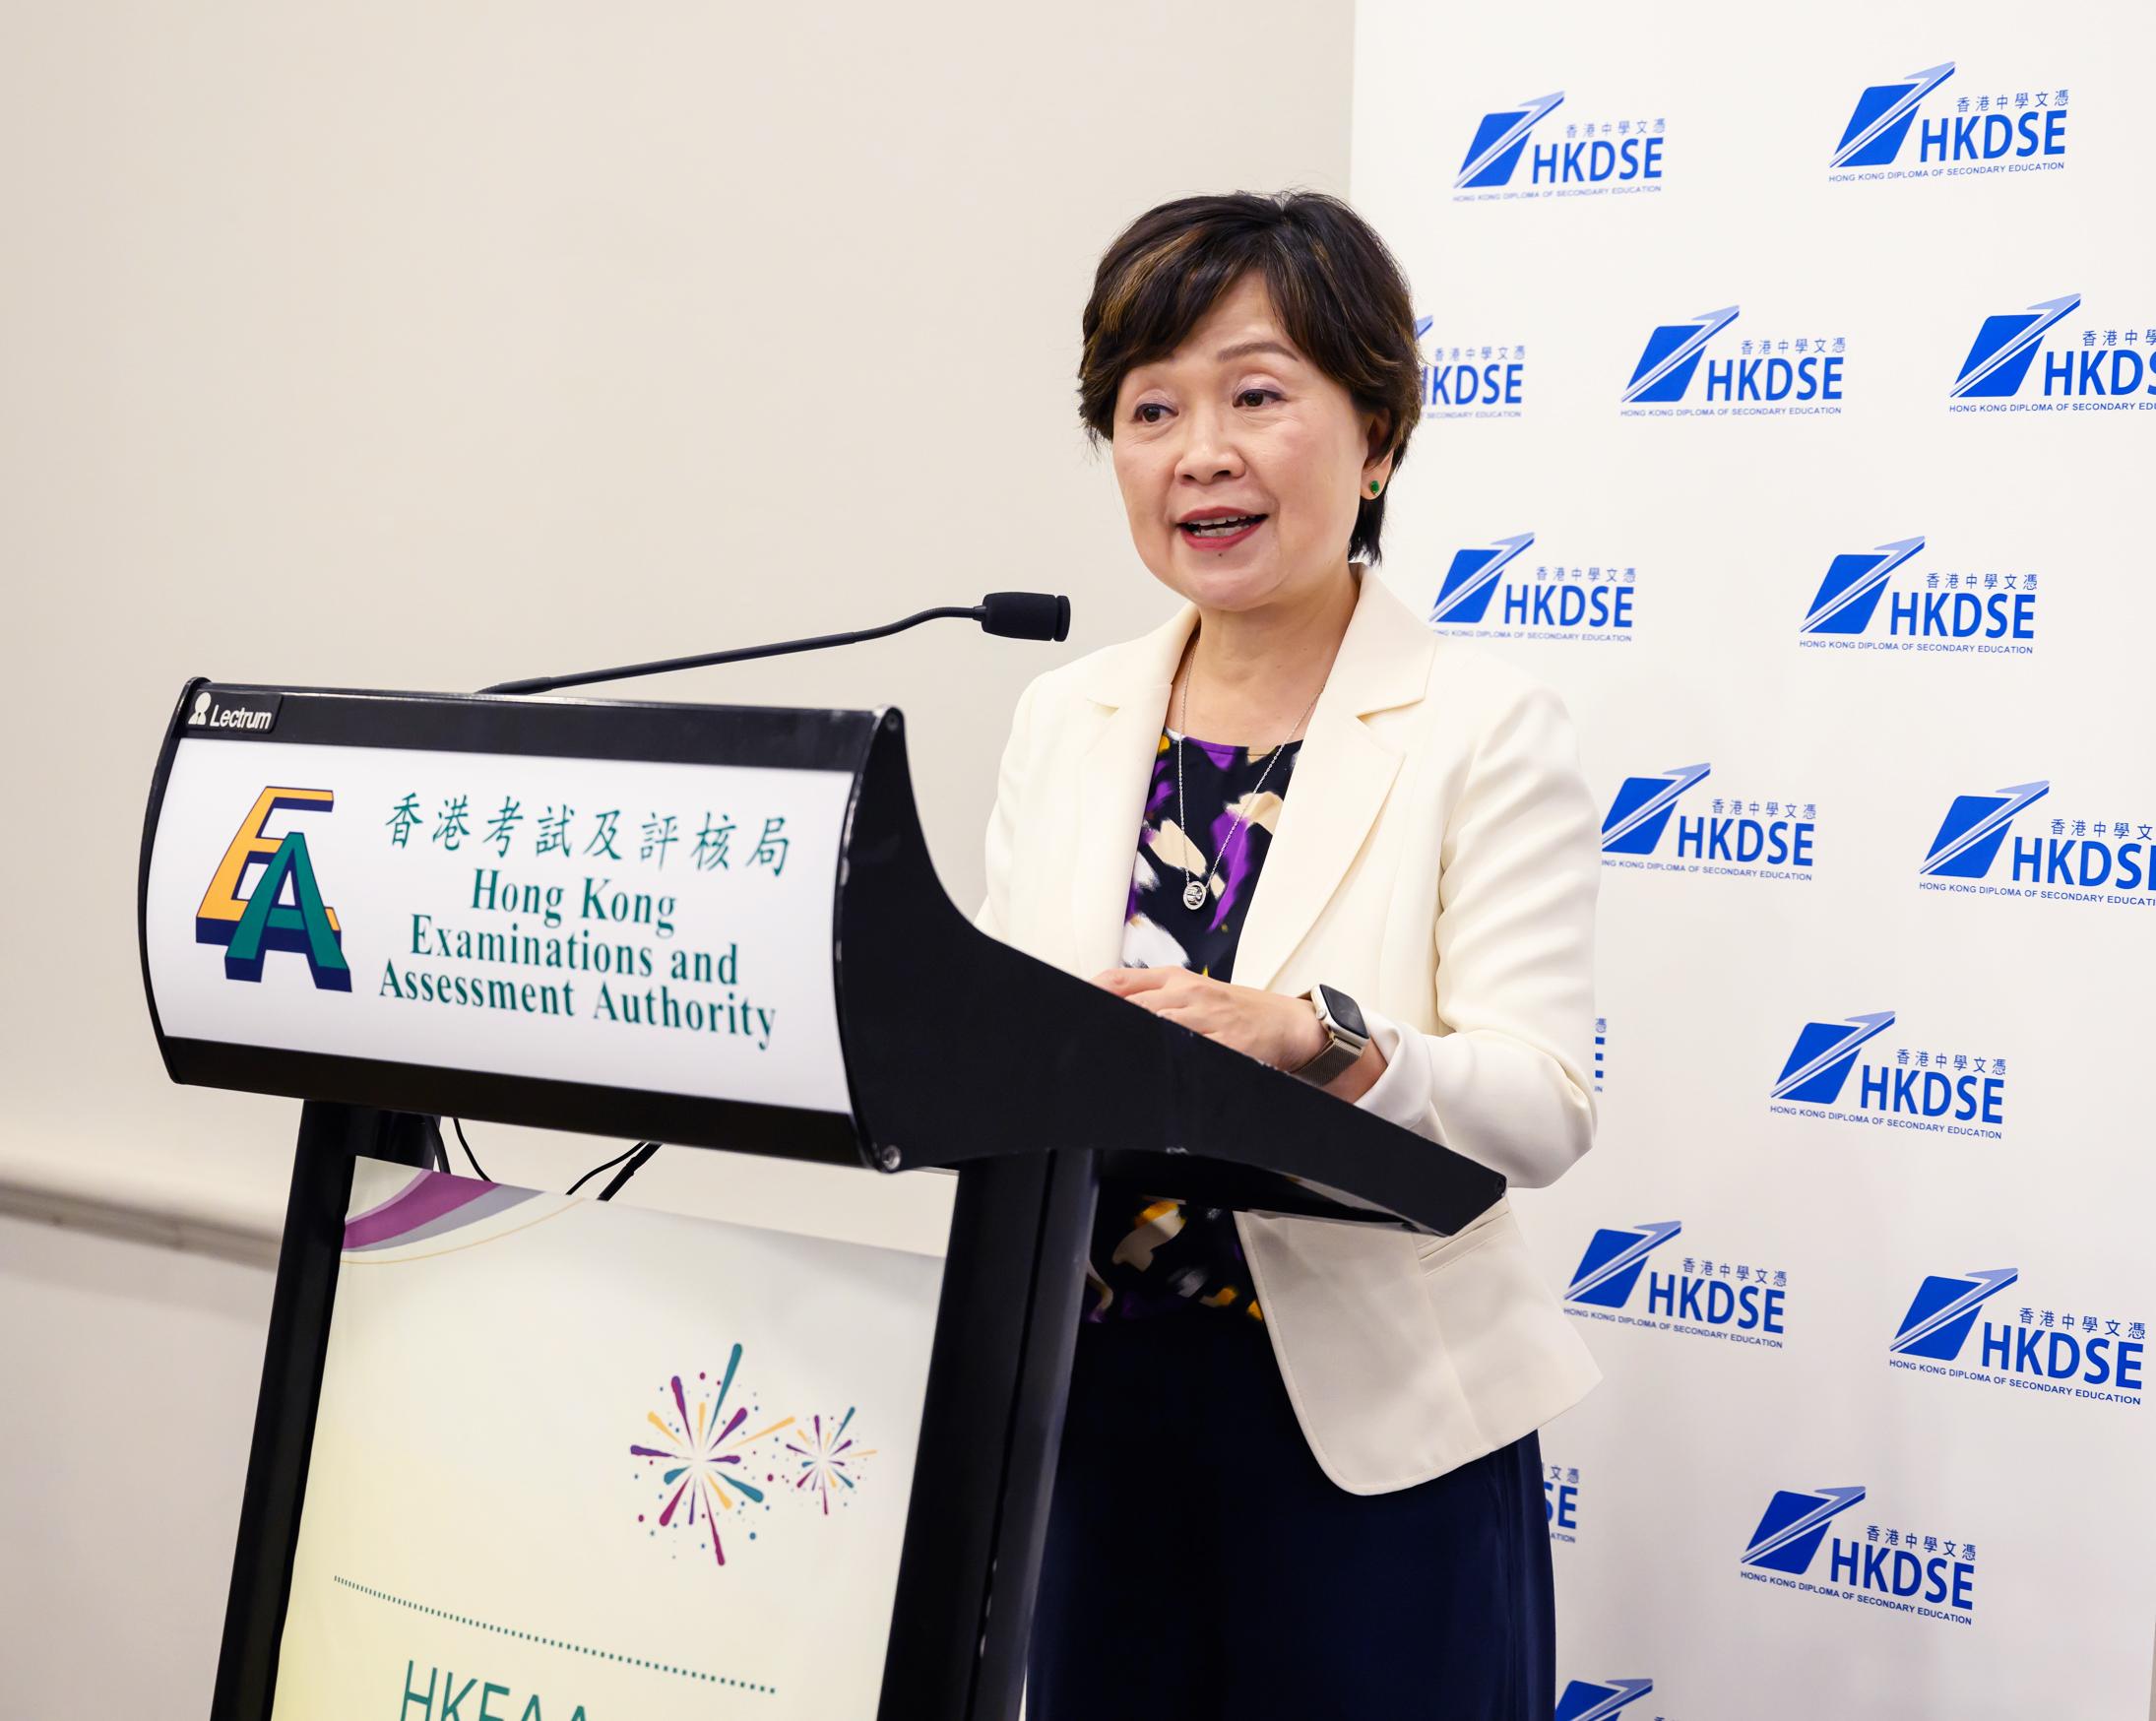 The Secretary for Education, Dr Choi Yuk-lin, delivers a speech at the luncheon reception hosted by the Hong Kong Examinations and Assessment Authority in Perth, Australia, on March 7 (Perth time).